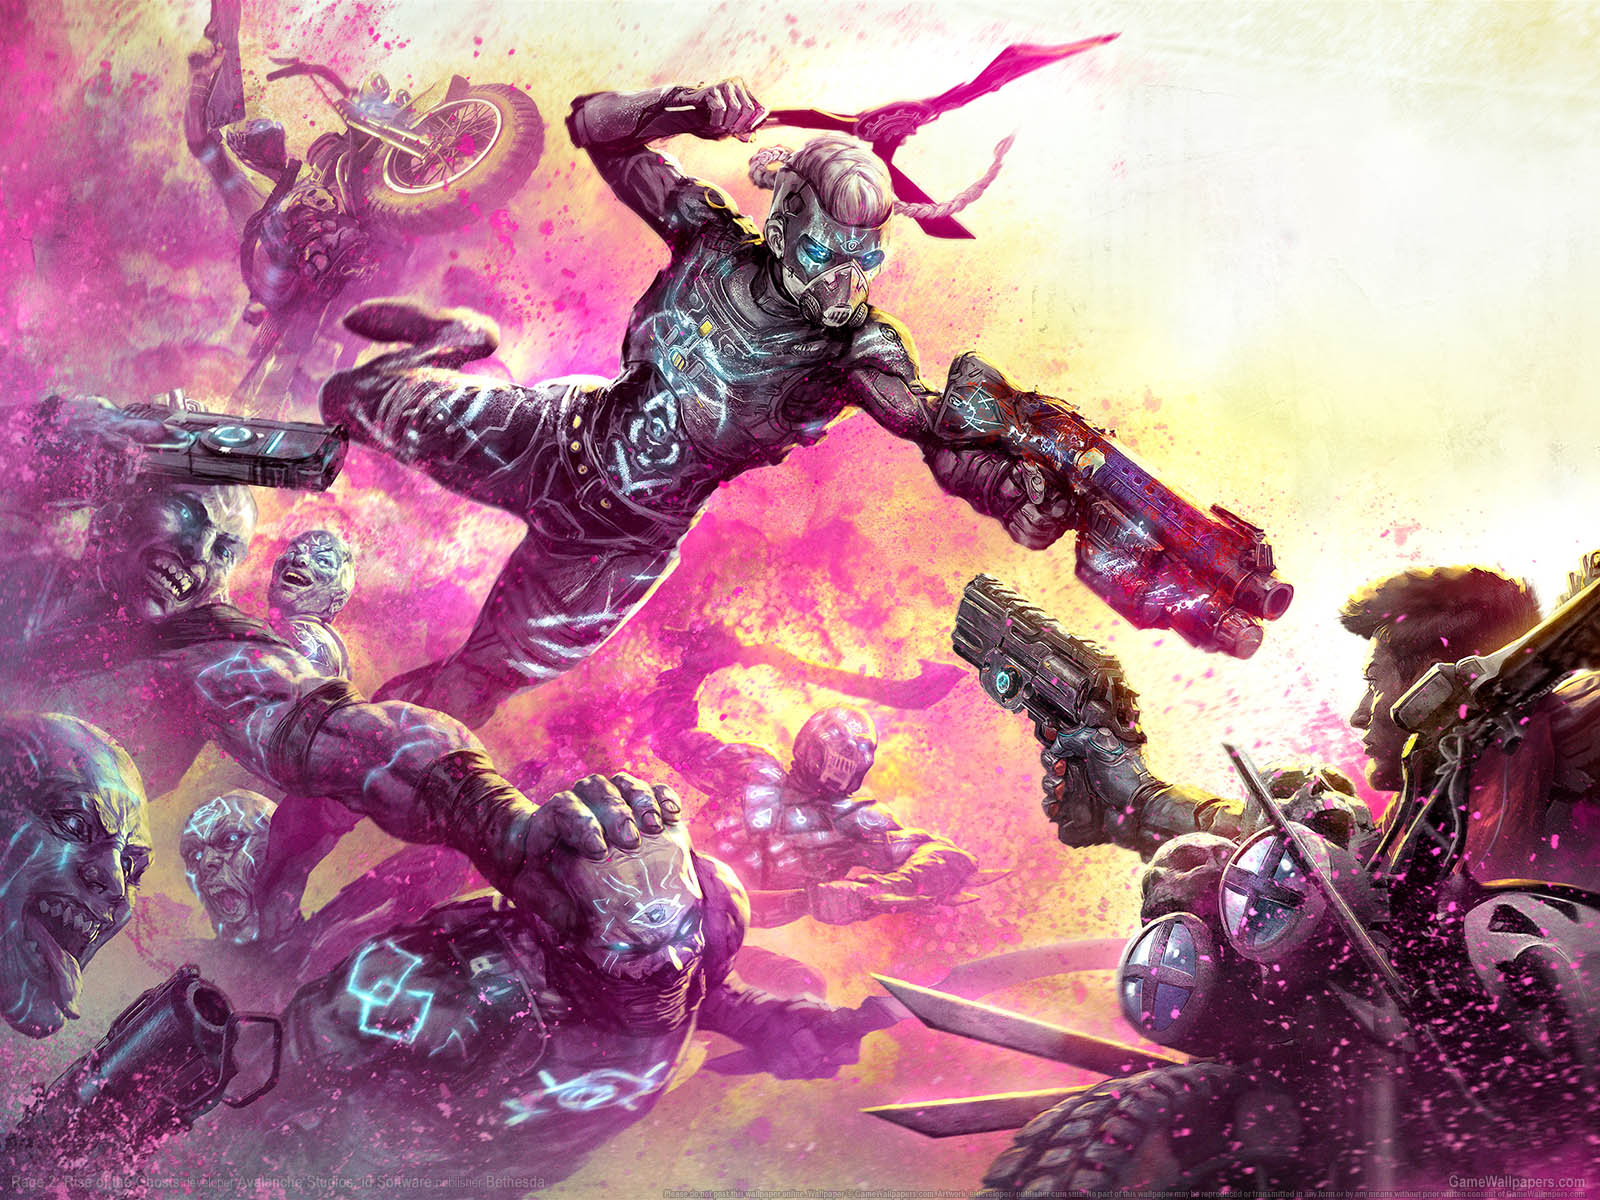 Rage 2%3A Rise of the Ghosts wallpaper 01 1600x1200